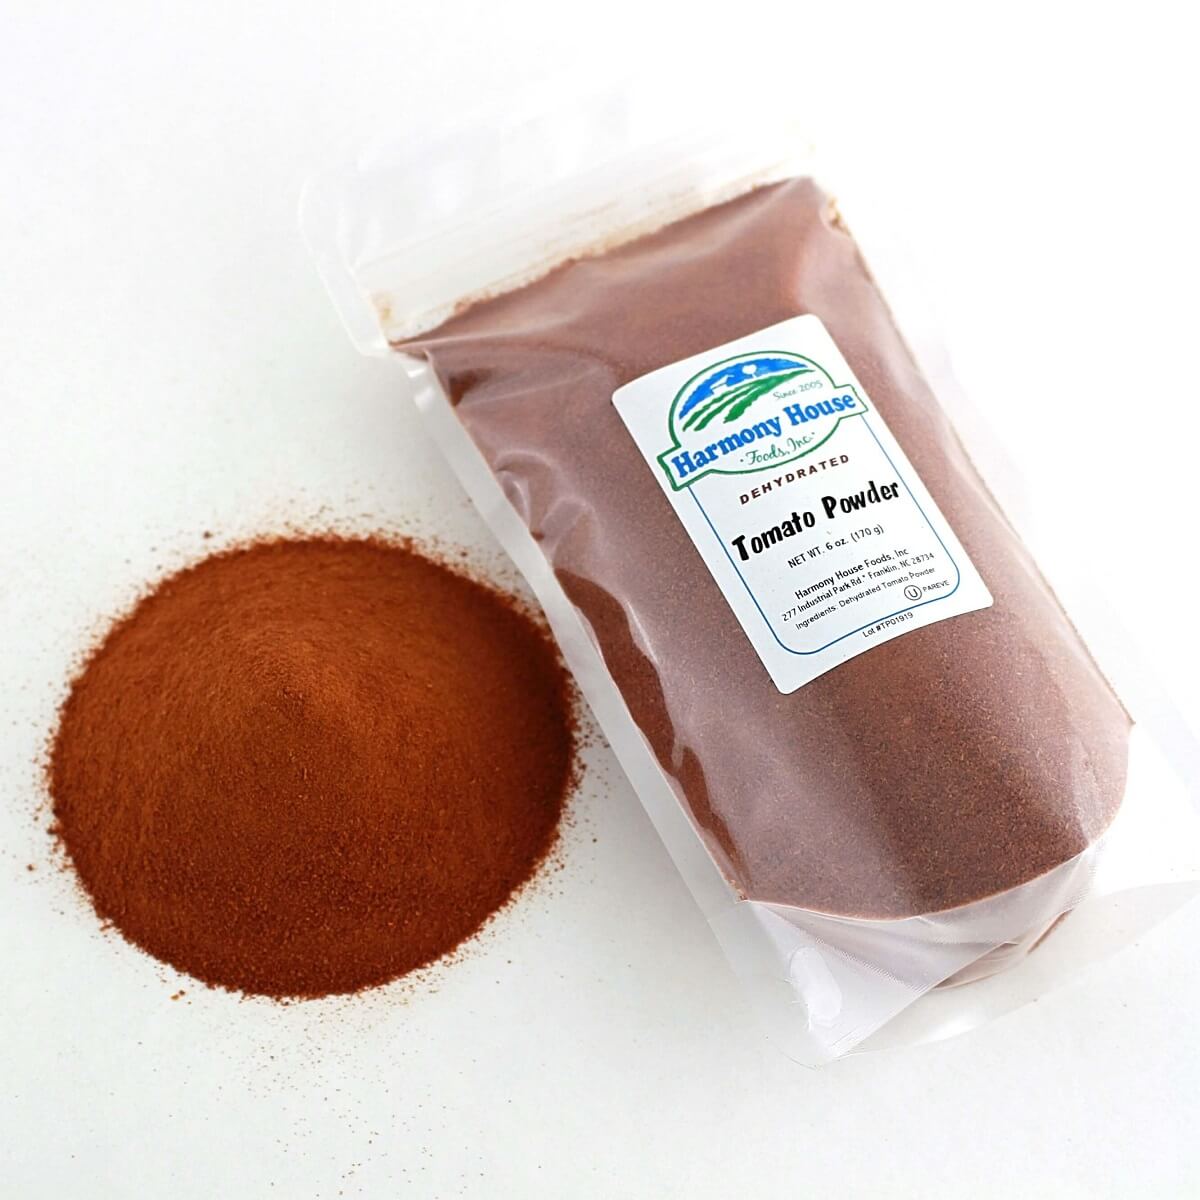 A bag of Harmony House Tomato Powder (6 oz) next to another bag.